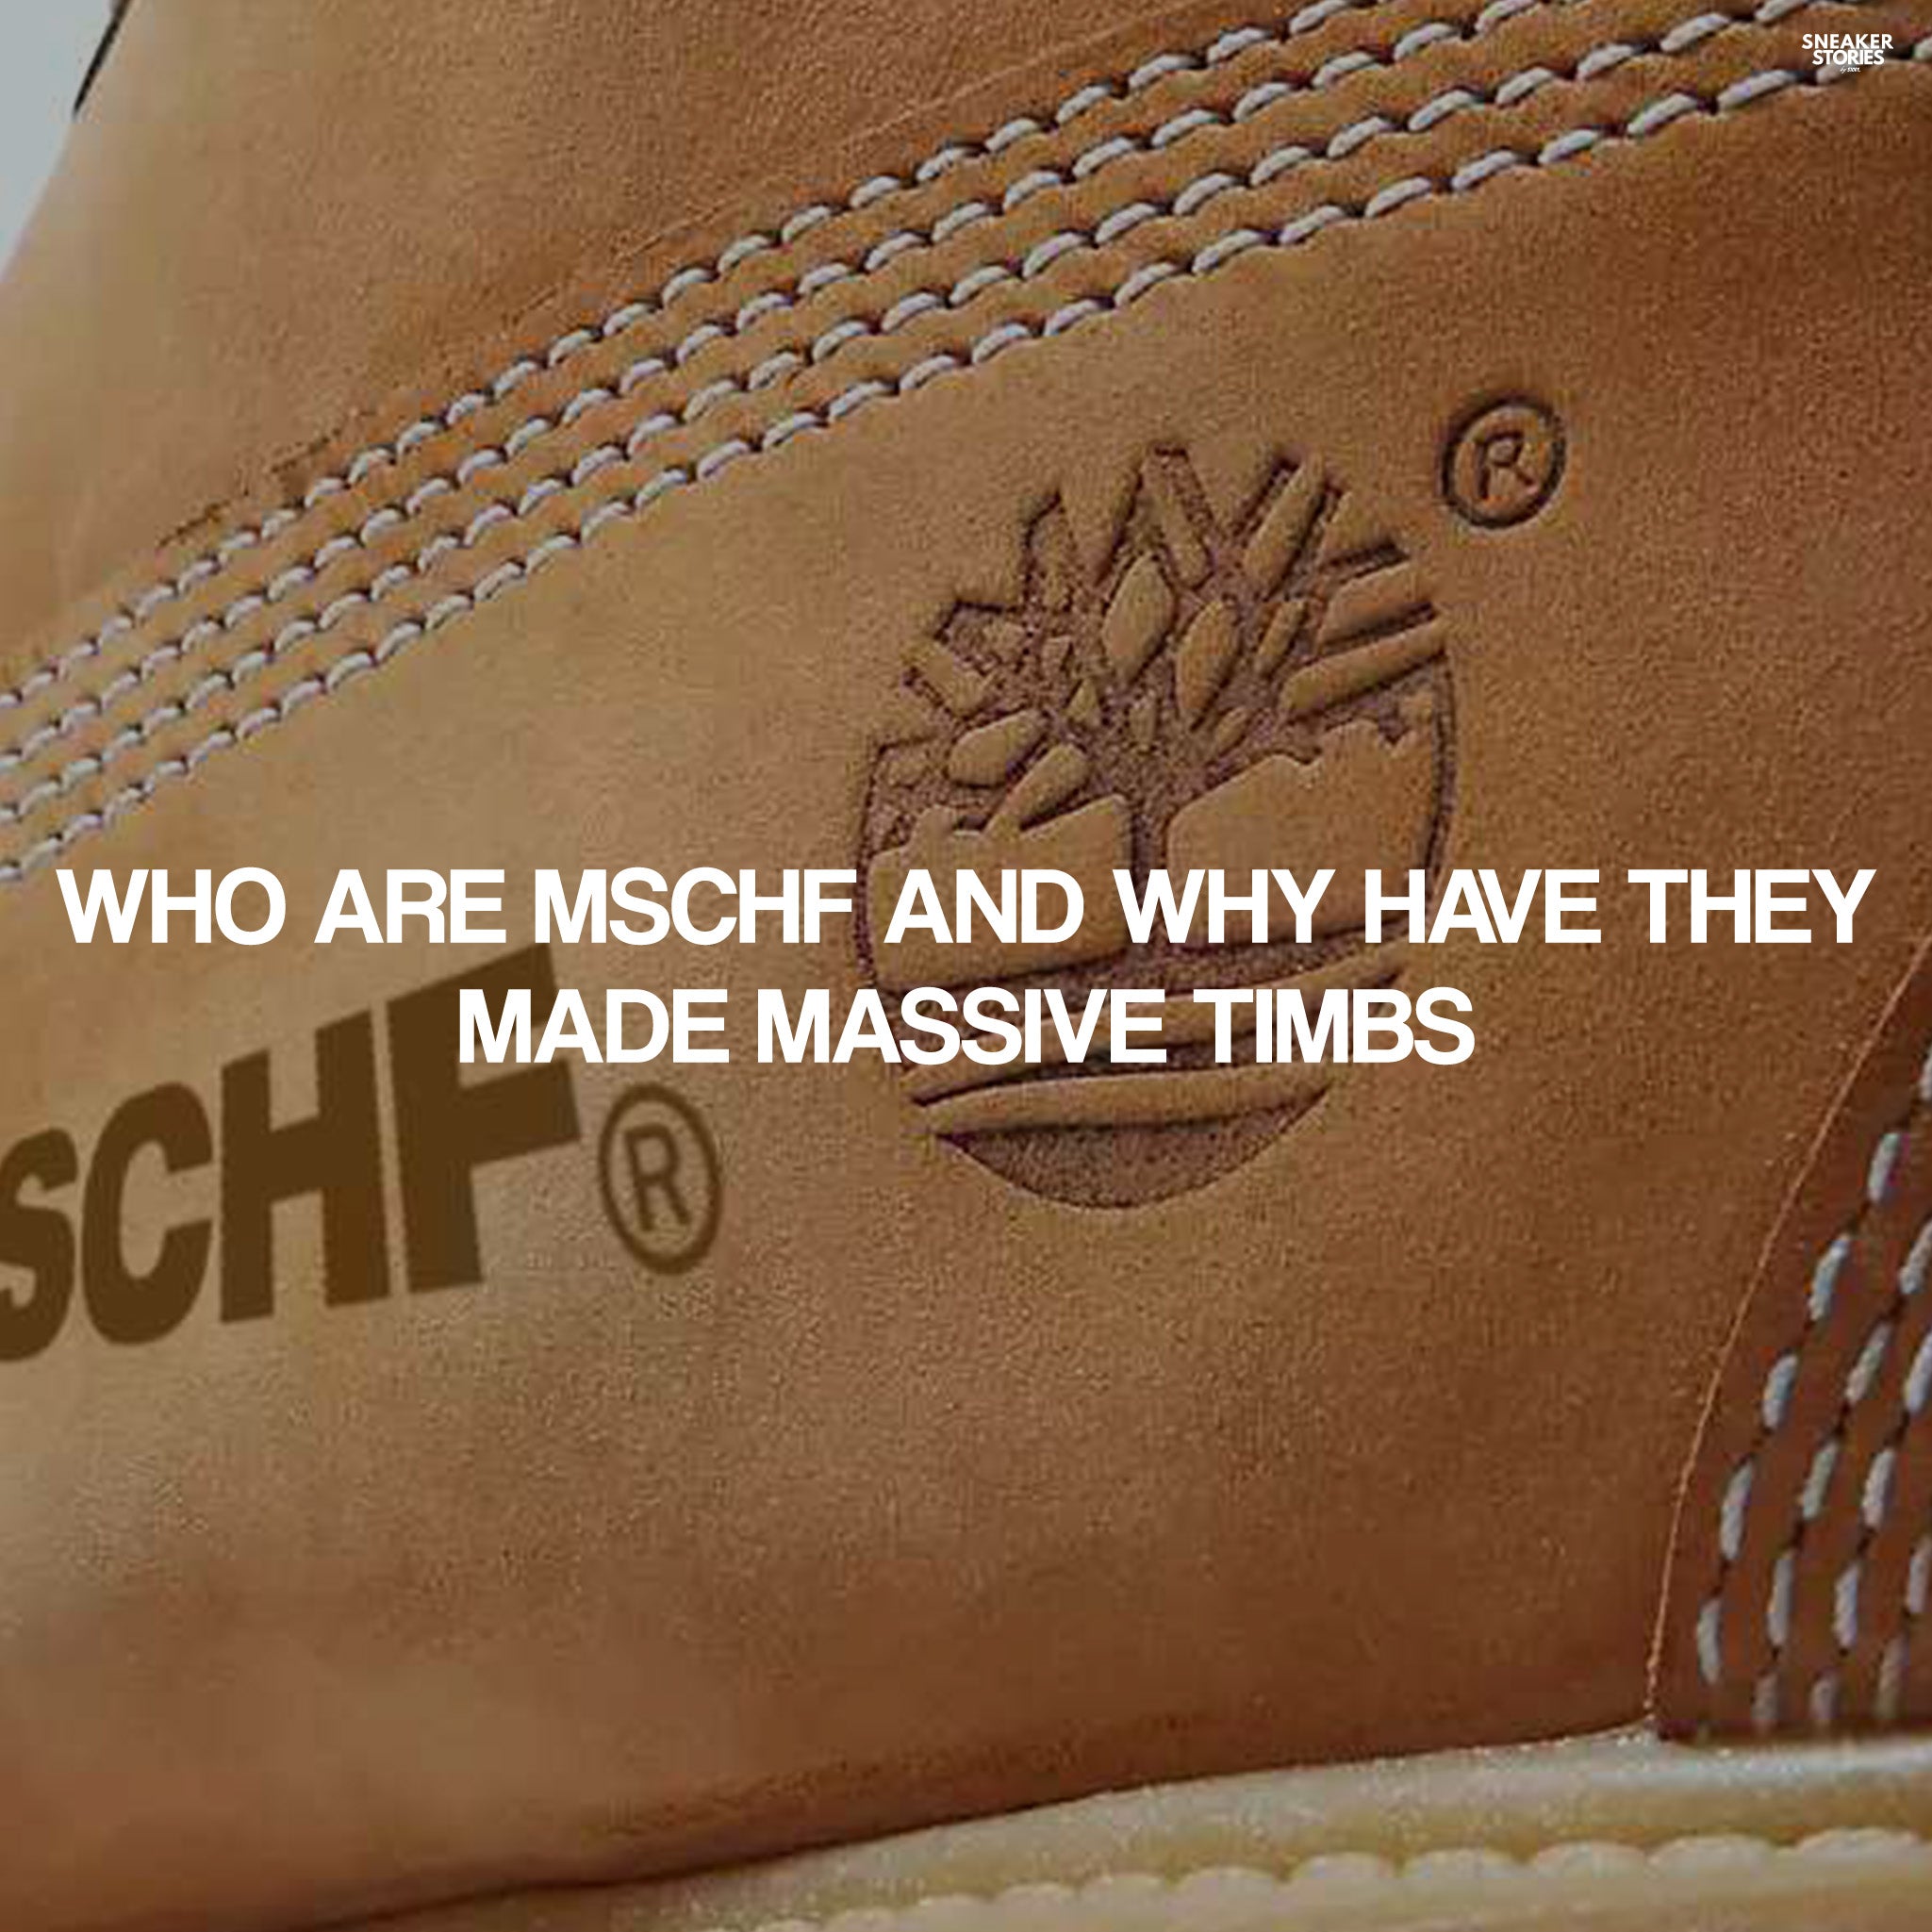 Who are MSCHF and why have they made massive timbs